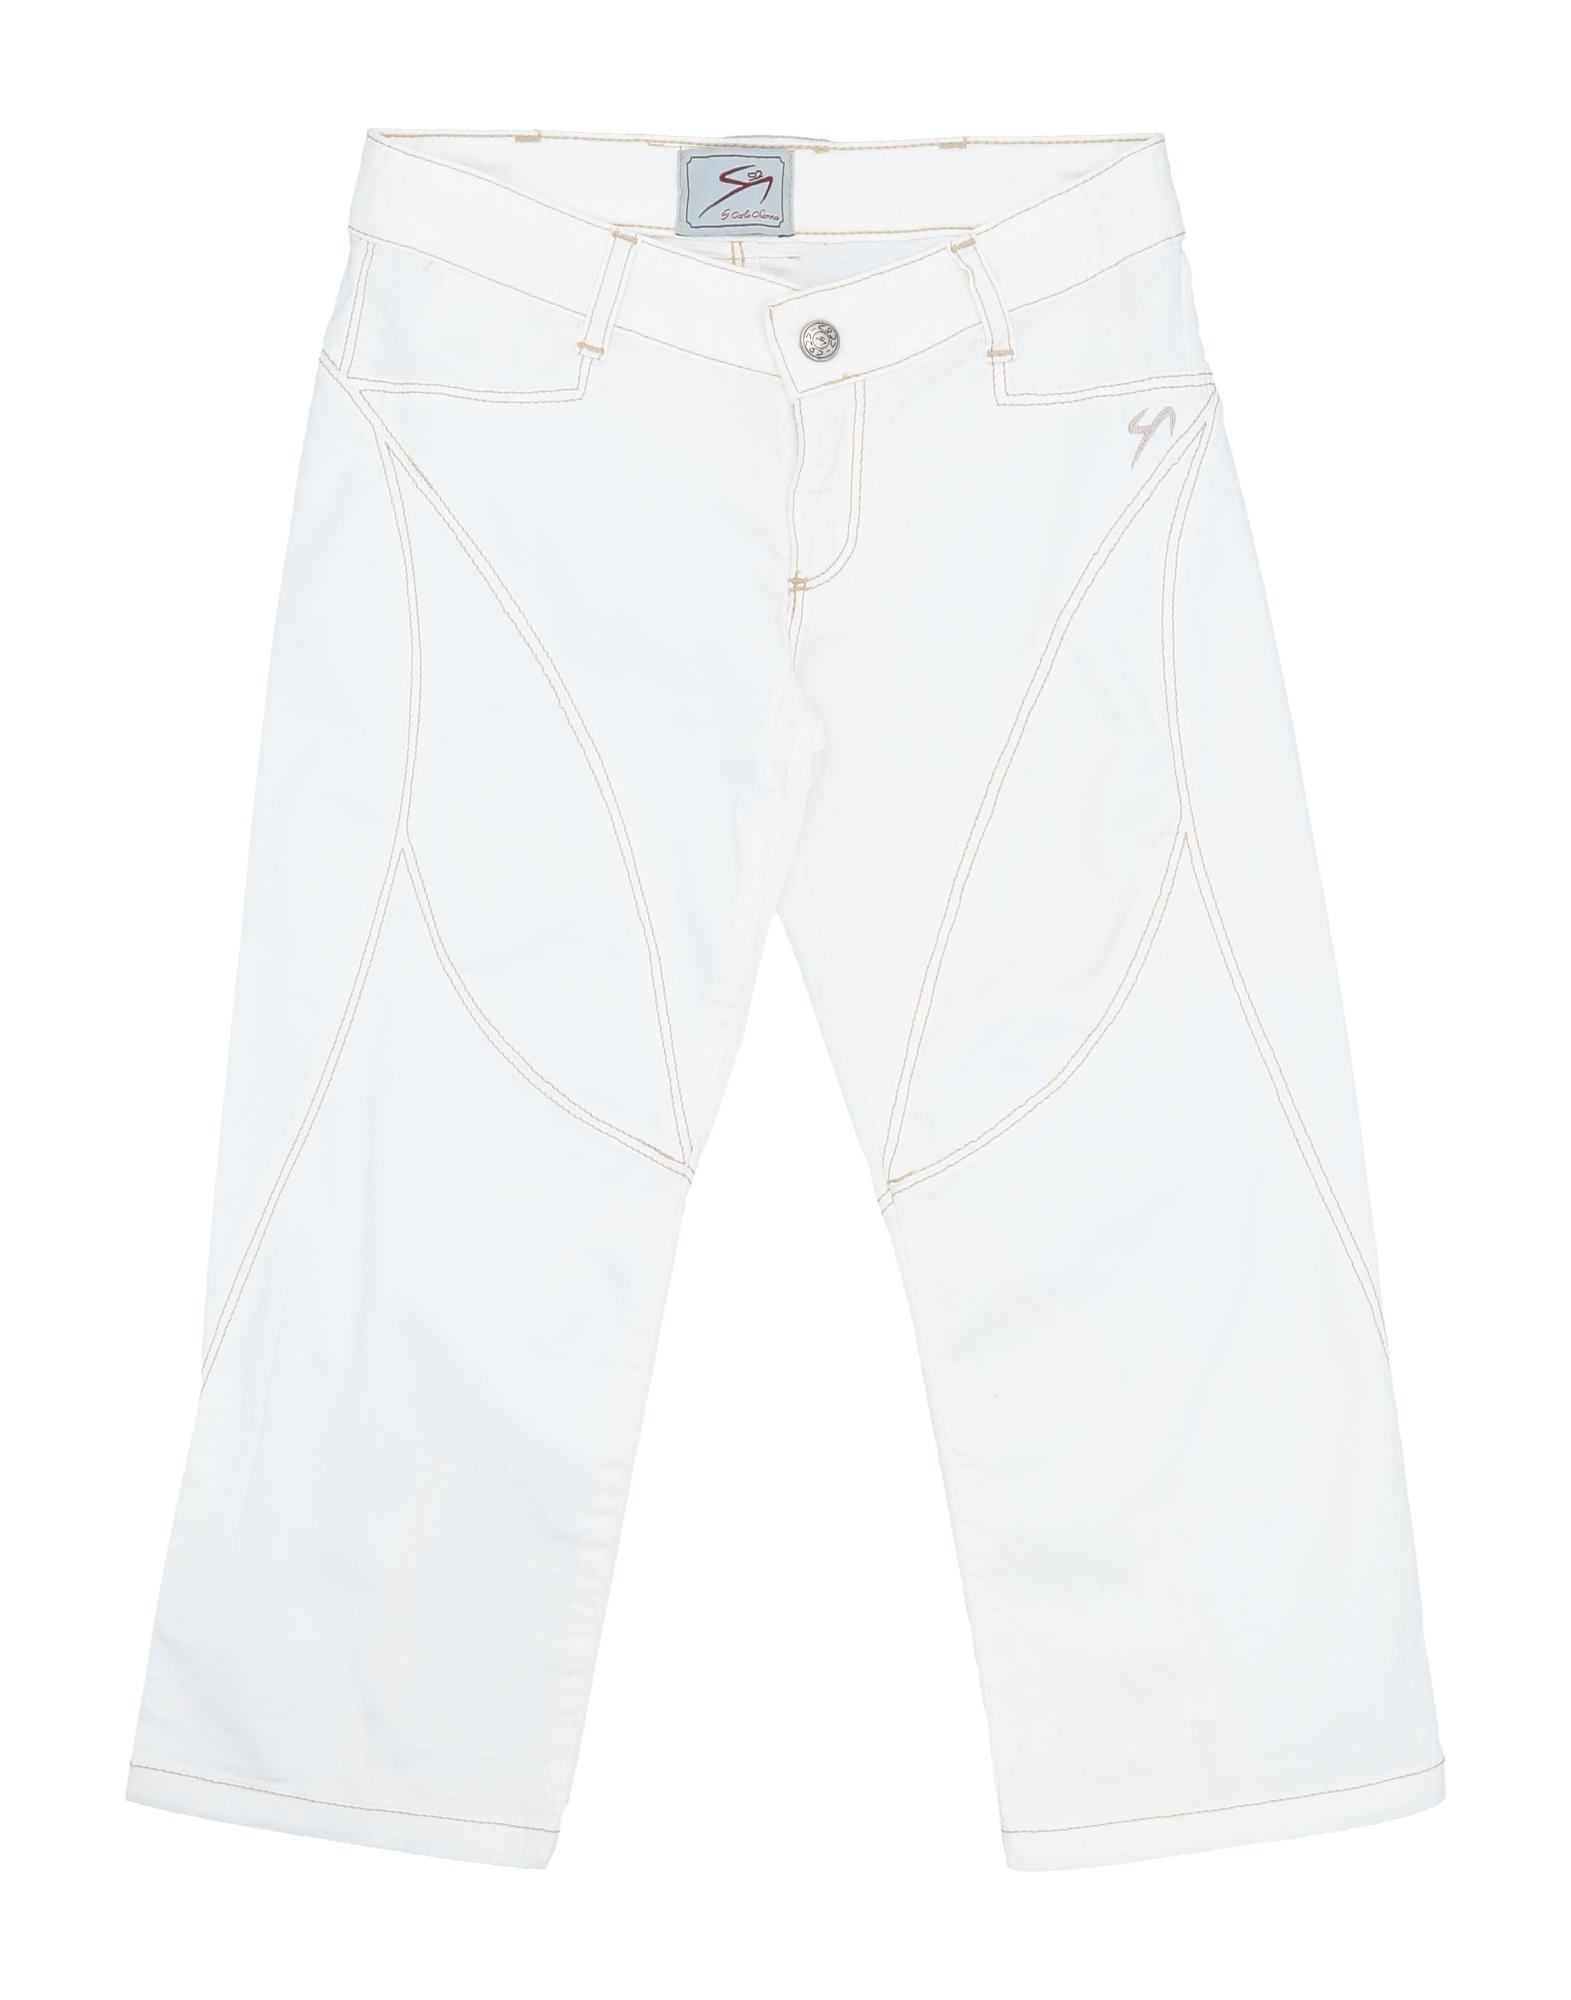 9.2 BY CARLO CHIONNA CASUAL PANTS,13300816JS 6